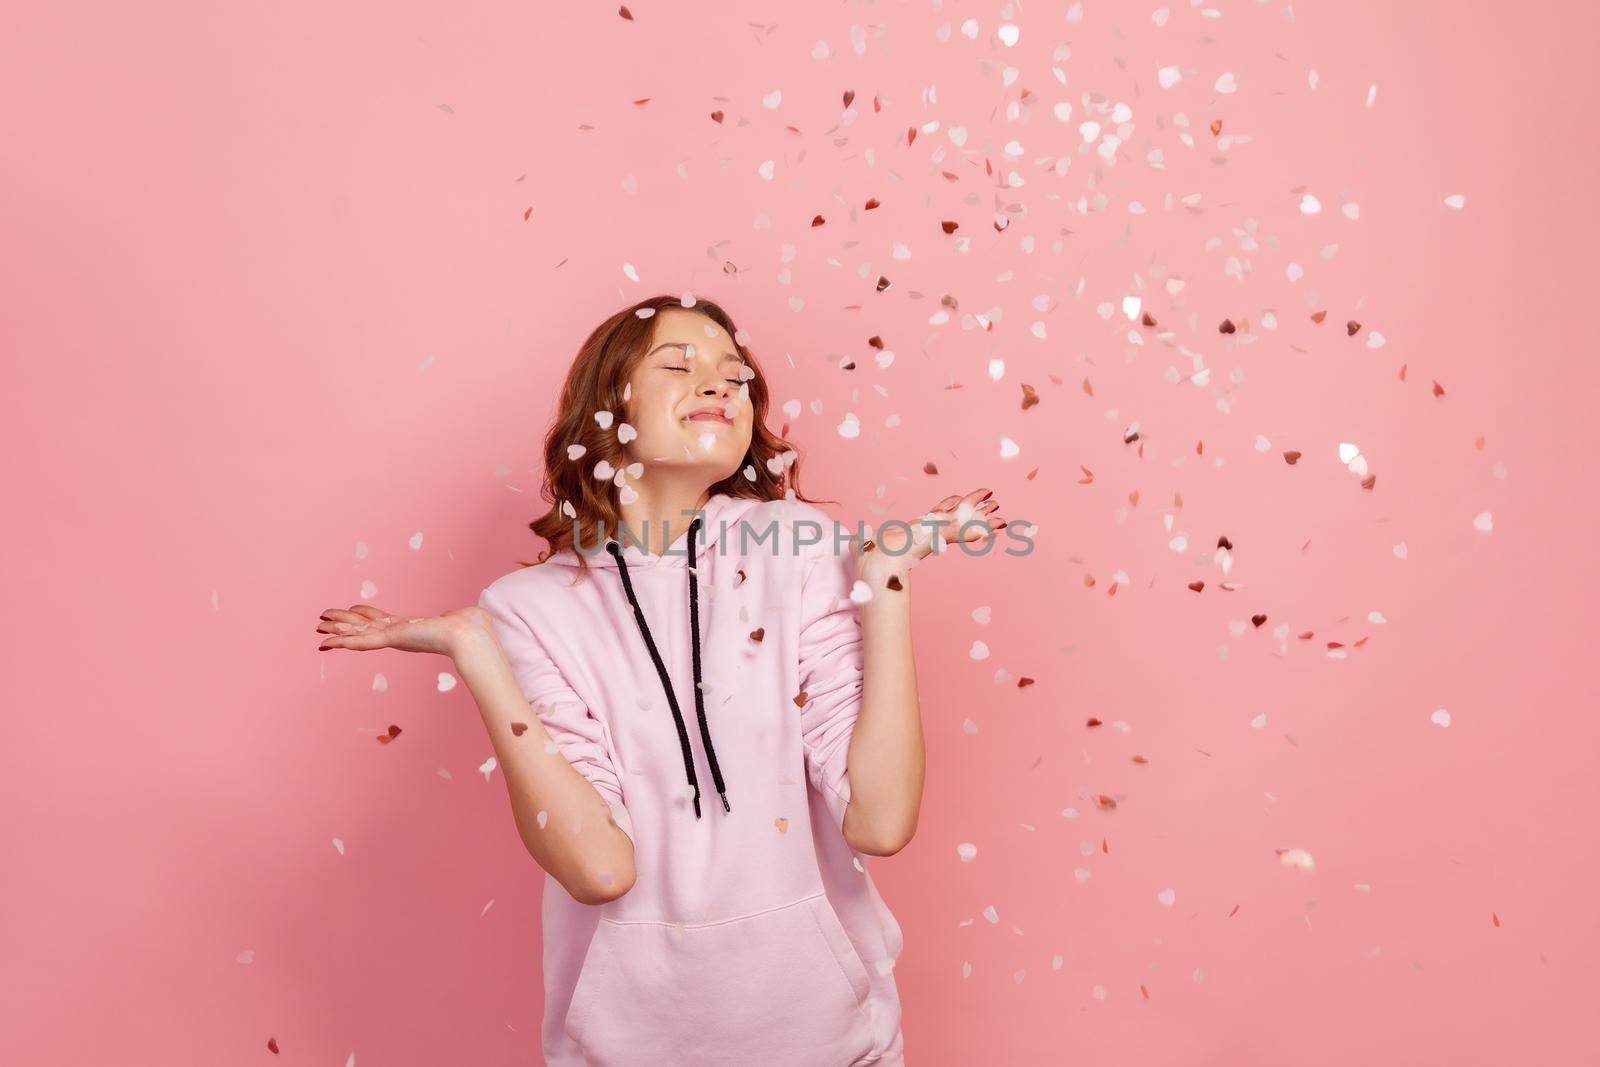 Extremely happy young brunette female enjoying falling heart shaped confetti and smiling with closed eyes, celebrating valentines day, holiday mood. Indoor studio shot, isolated on pink background